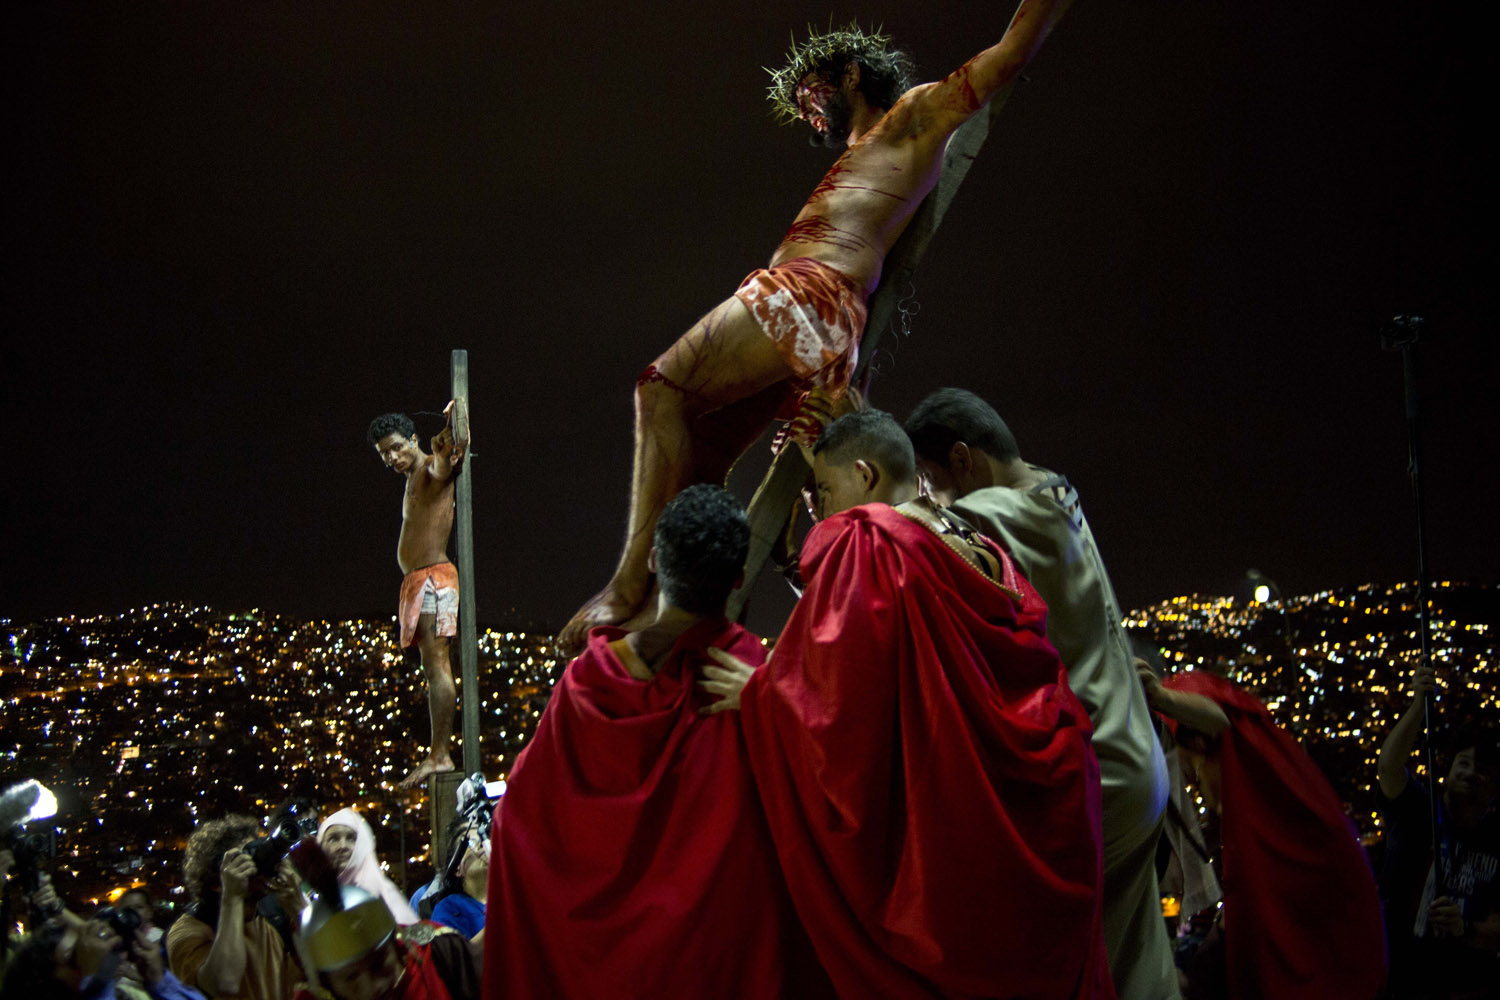 Apr. 18, 2014. Residents reenact Jesus Christ's crucifixion on a hilltop in the Petare shanty town during Holy Week in Caracas, Venezuela.